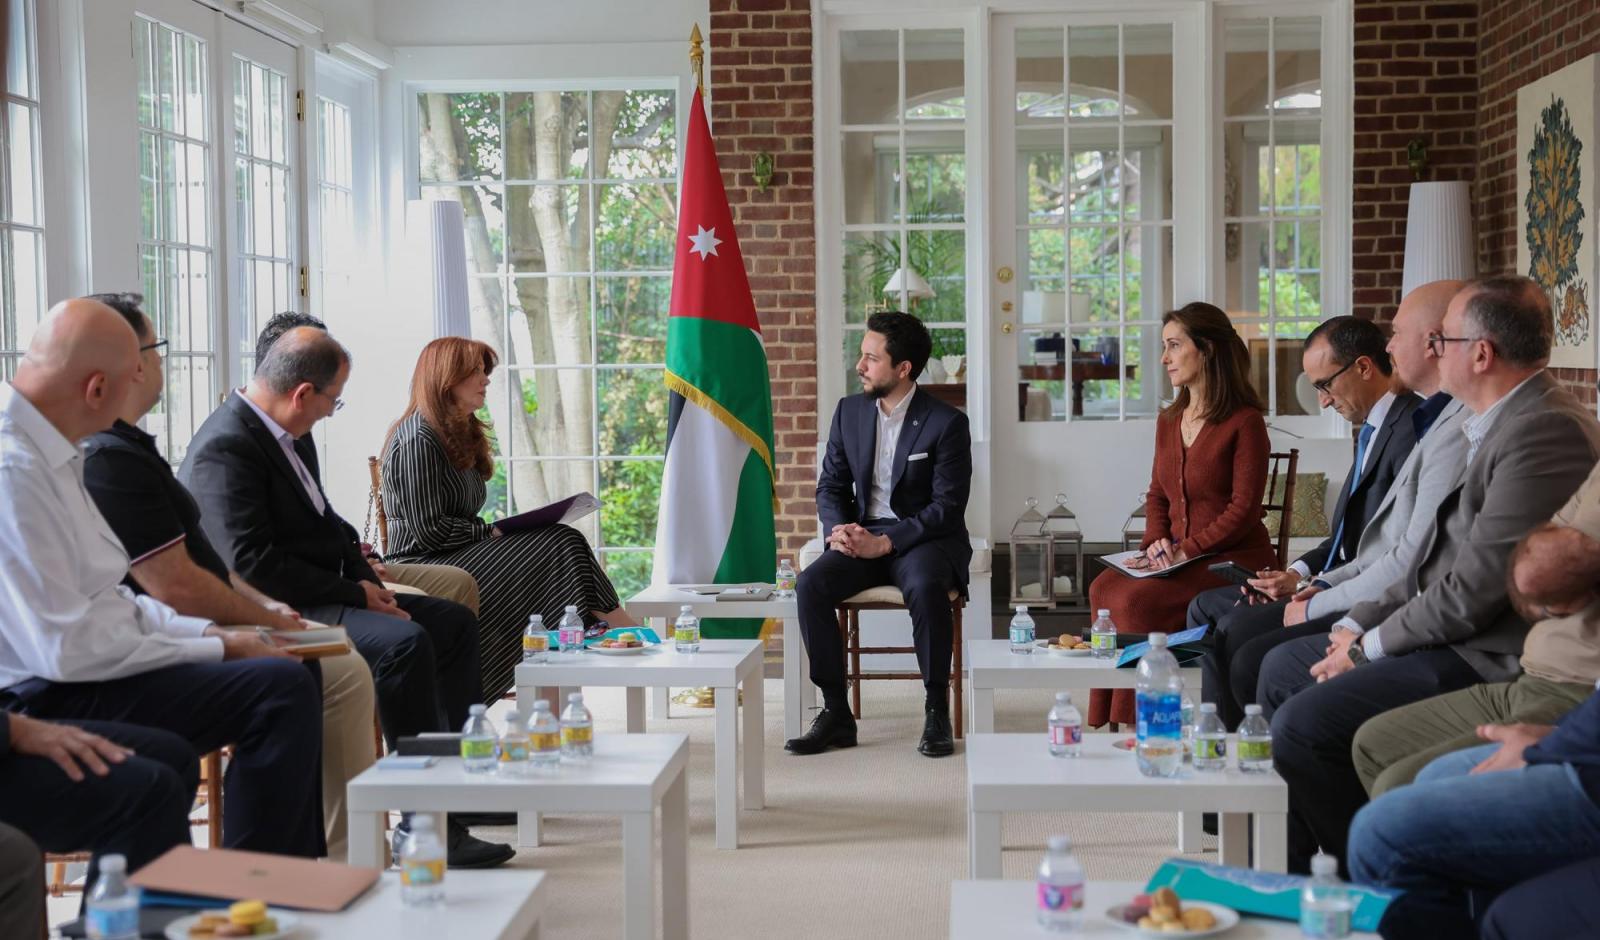 Crown Prince meets Jordanian business leaders working in technology in Washington, DC